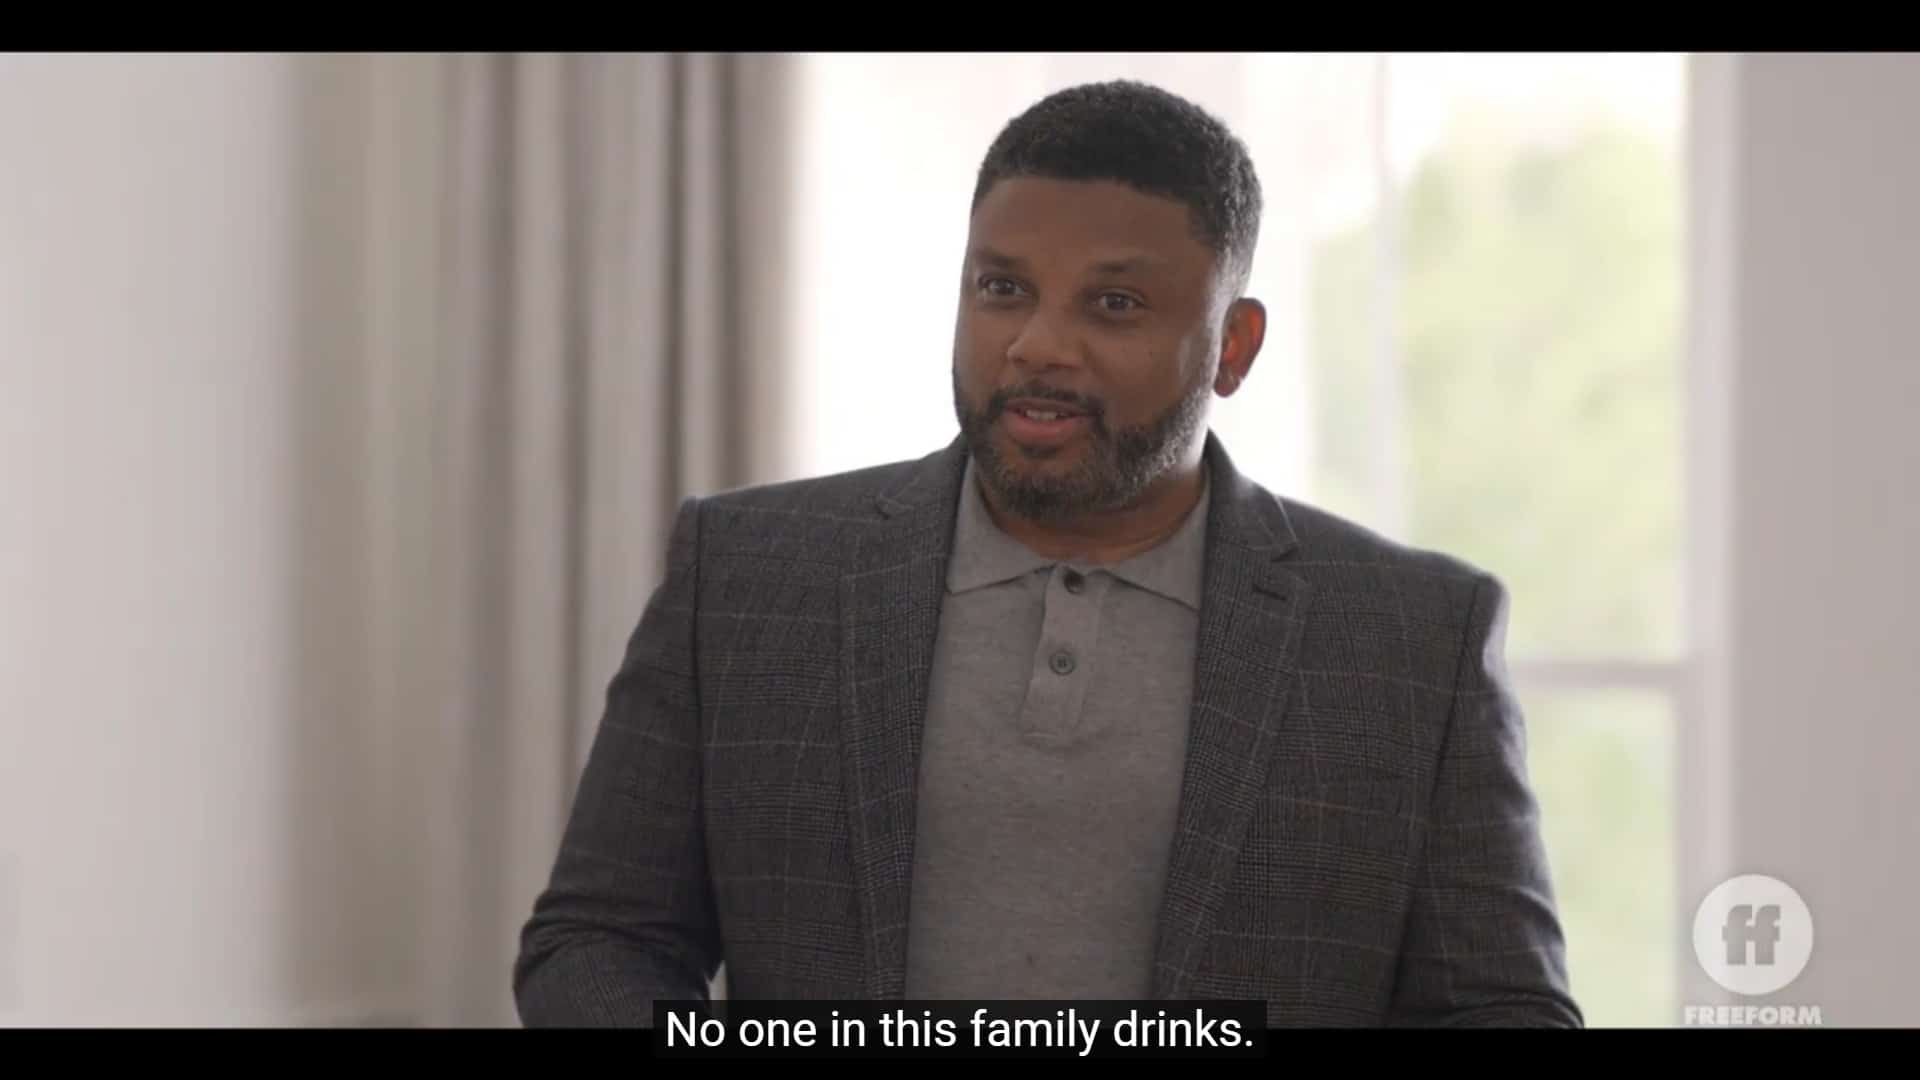 George (Carl Anthony Payne II) in denial about his son's alcoholism